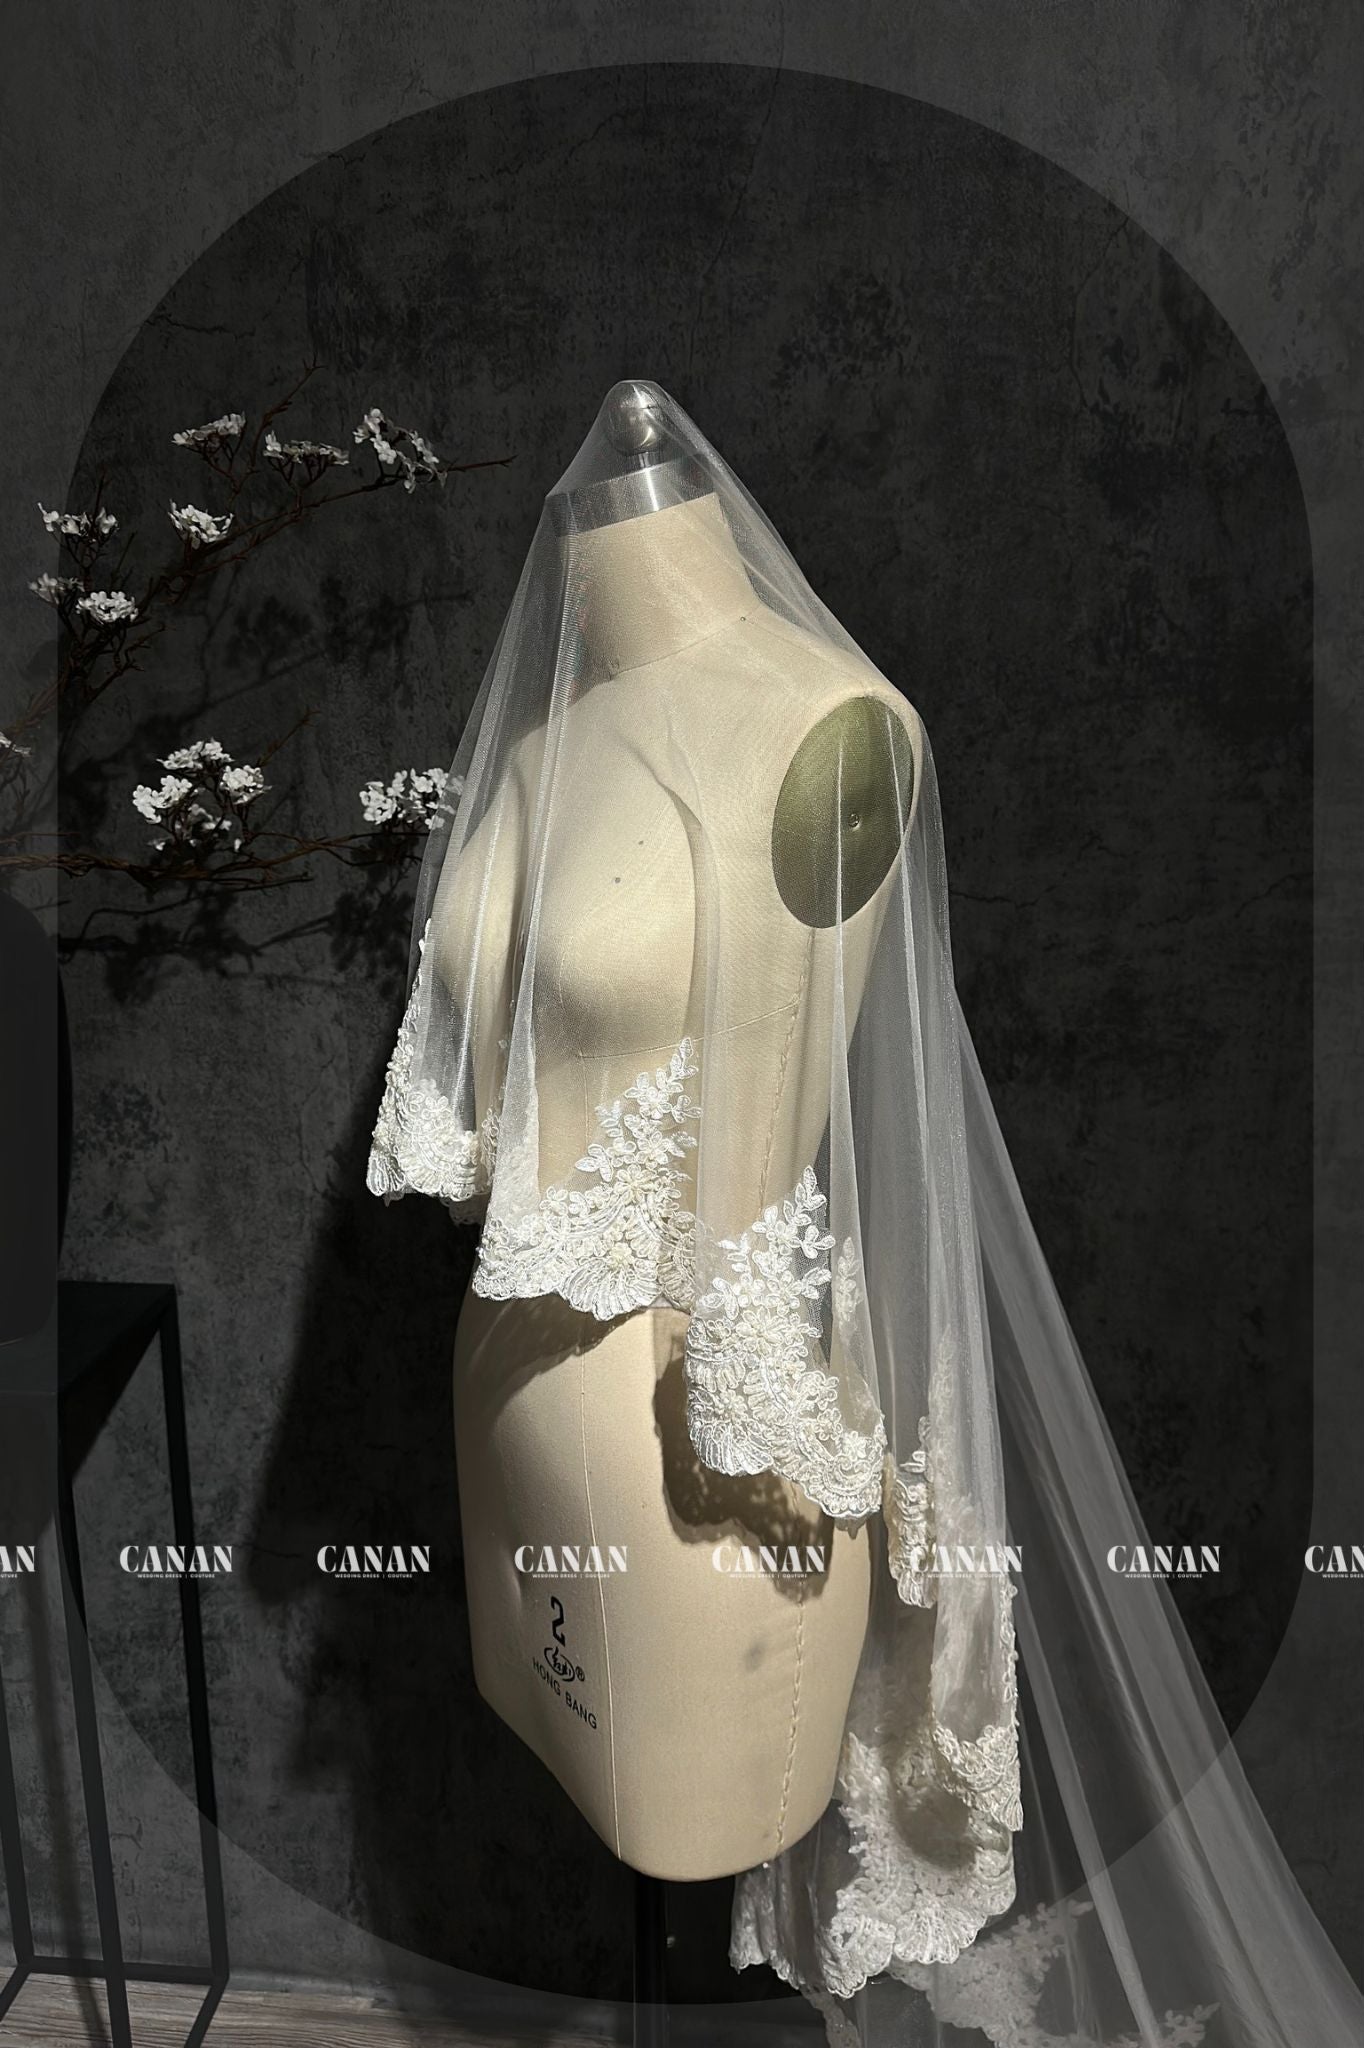 Caily - Bridal accessories